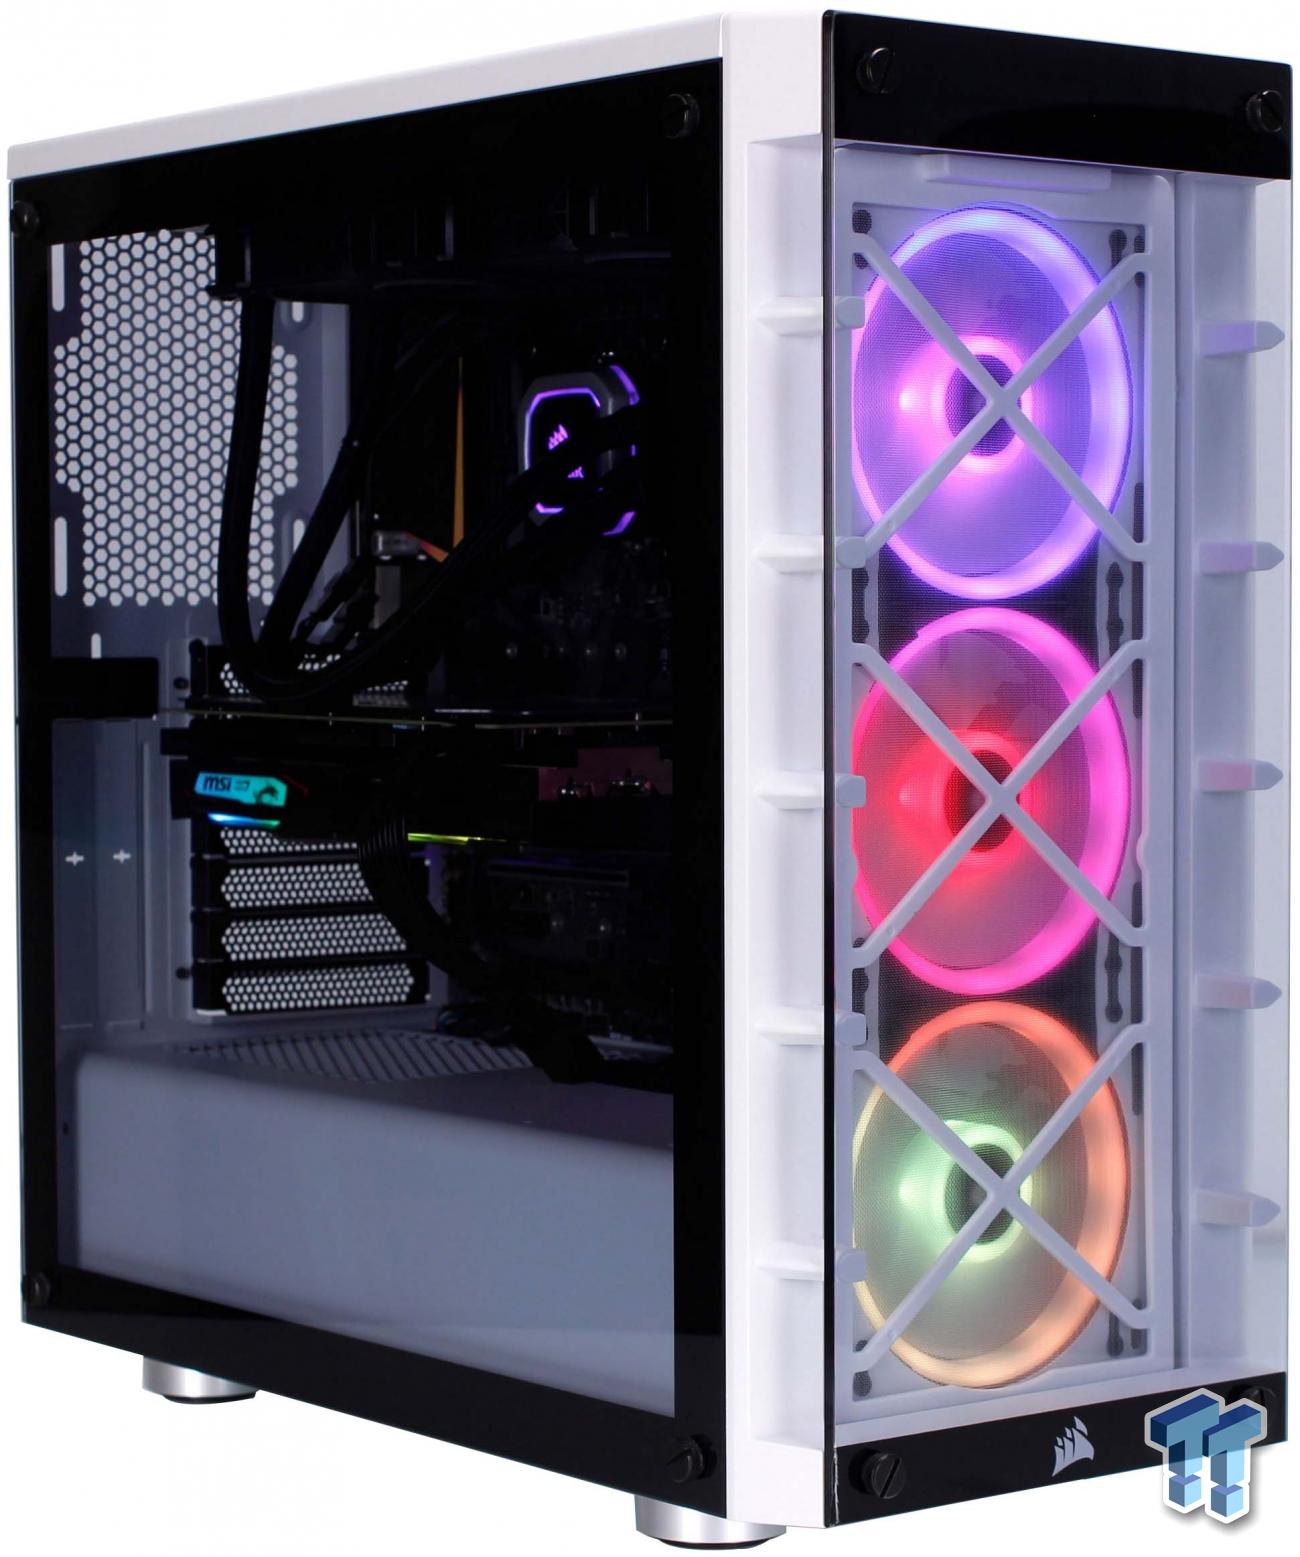 Repressalier brud Decimal Corsair iCUE 465X Mid-Tower Chassis Review